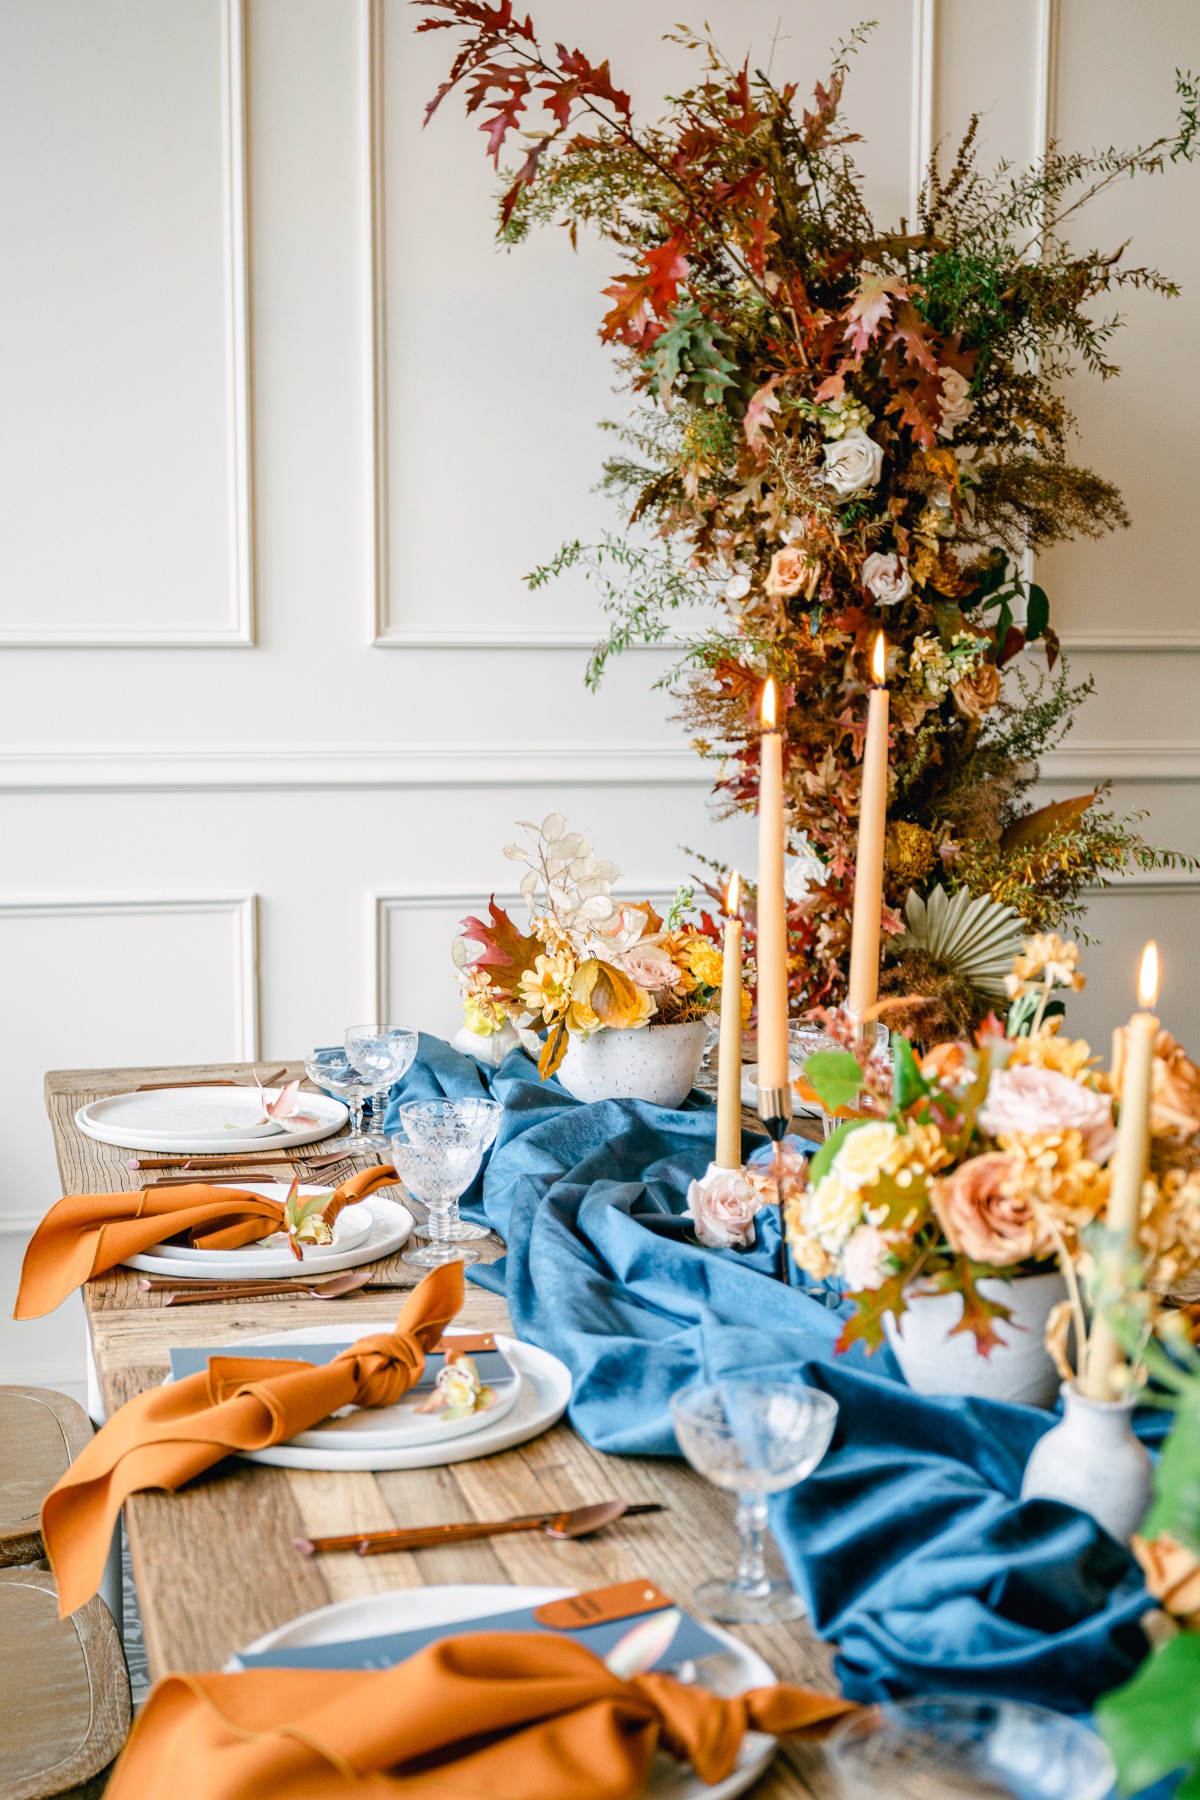 This Modern Fall Wedding Inspiration In Portland Brings Terracotta Blue to the Table[scape]